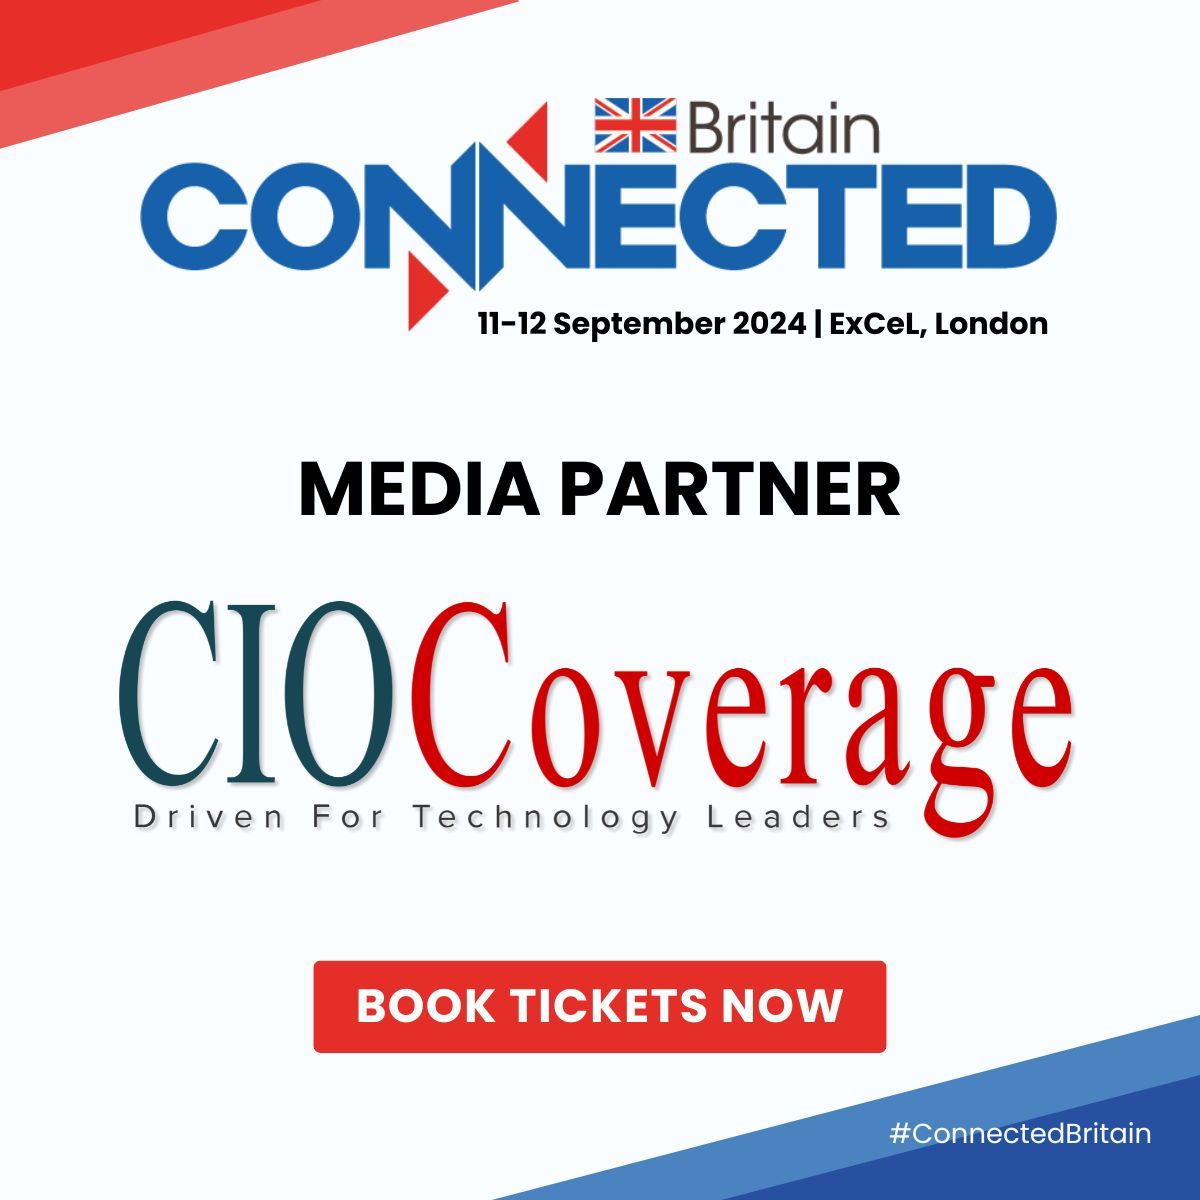 Excited to announce our partnership with @CIOCoverage for #ConnectedBritain 2024! 🌐 Stay informed with their cutting-edge insights into IT leadership. Join us on 11-12th September for two days of essential learning! 

Save £855 and secure your place now: buff.ly/4akHgTc